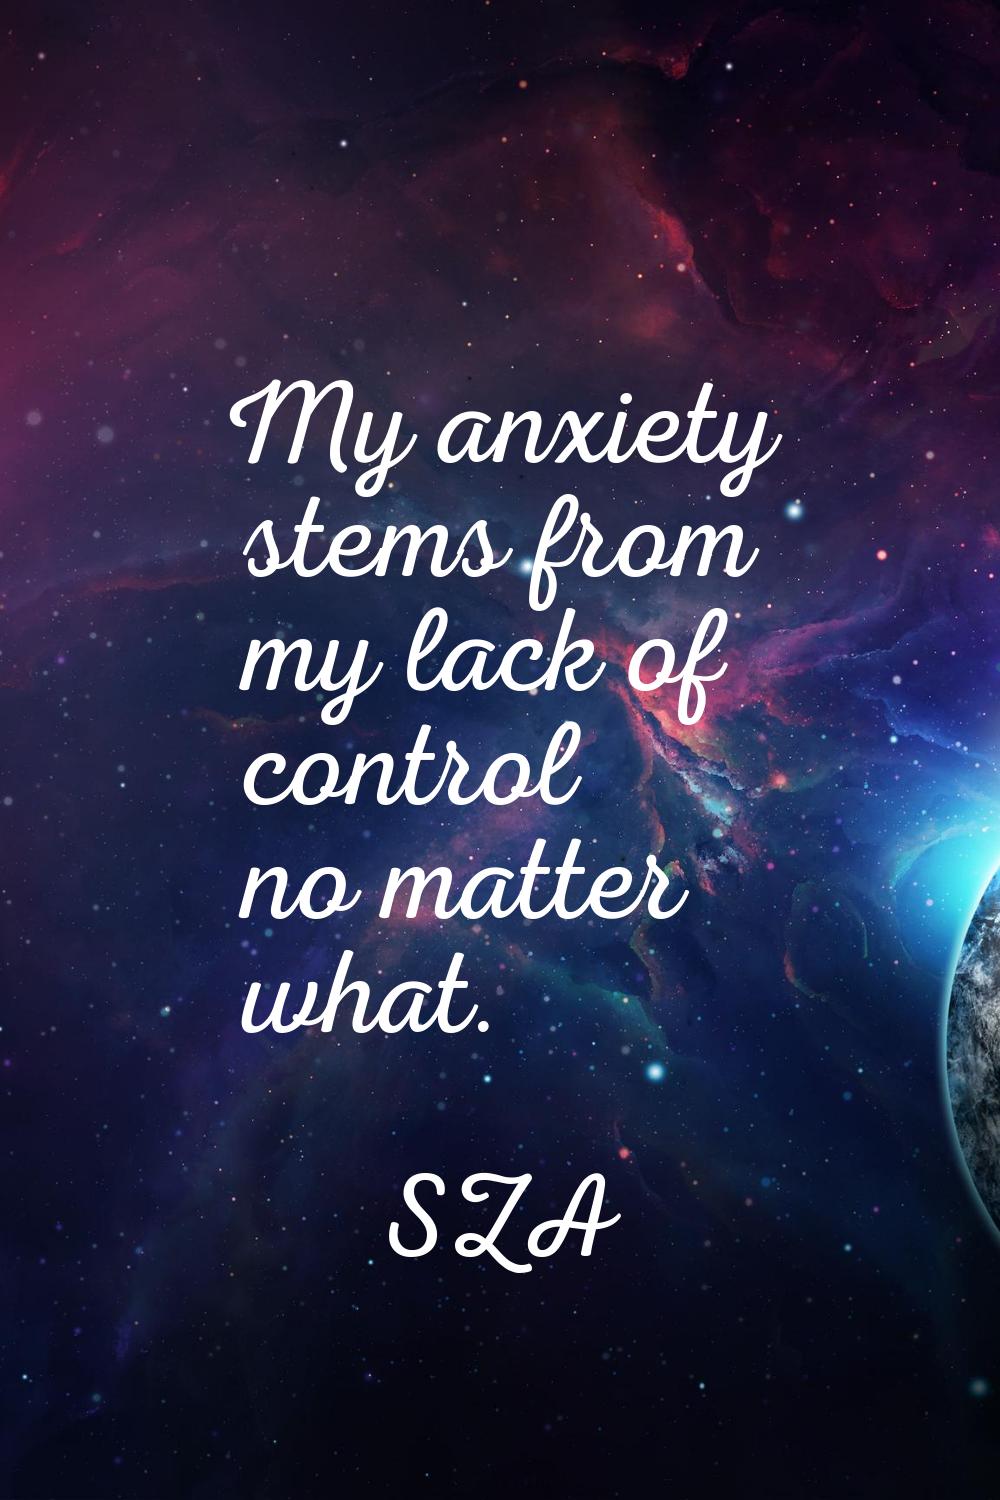 My anxiety stems from my lack of control no matter what.